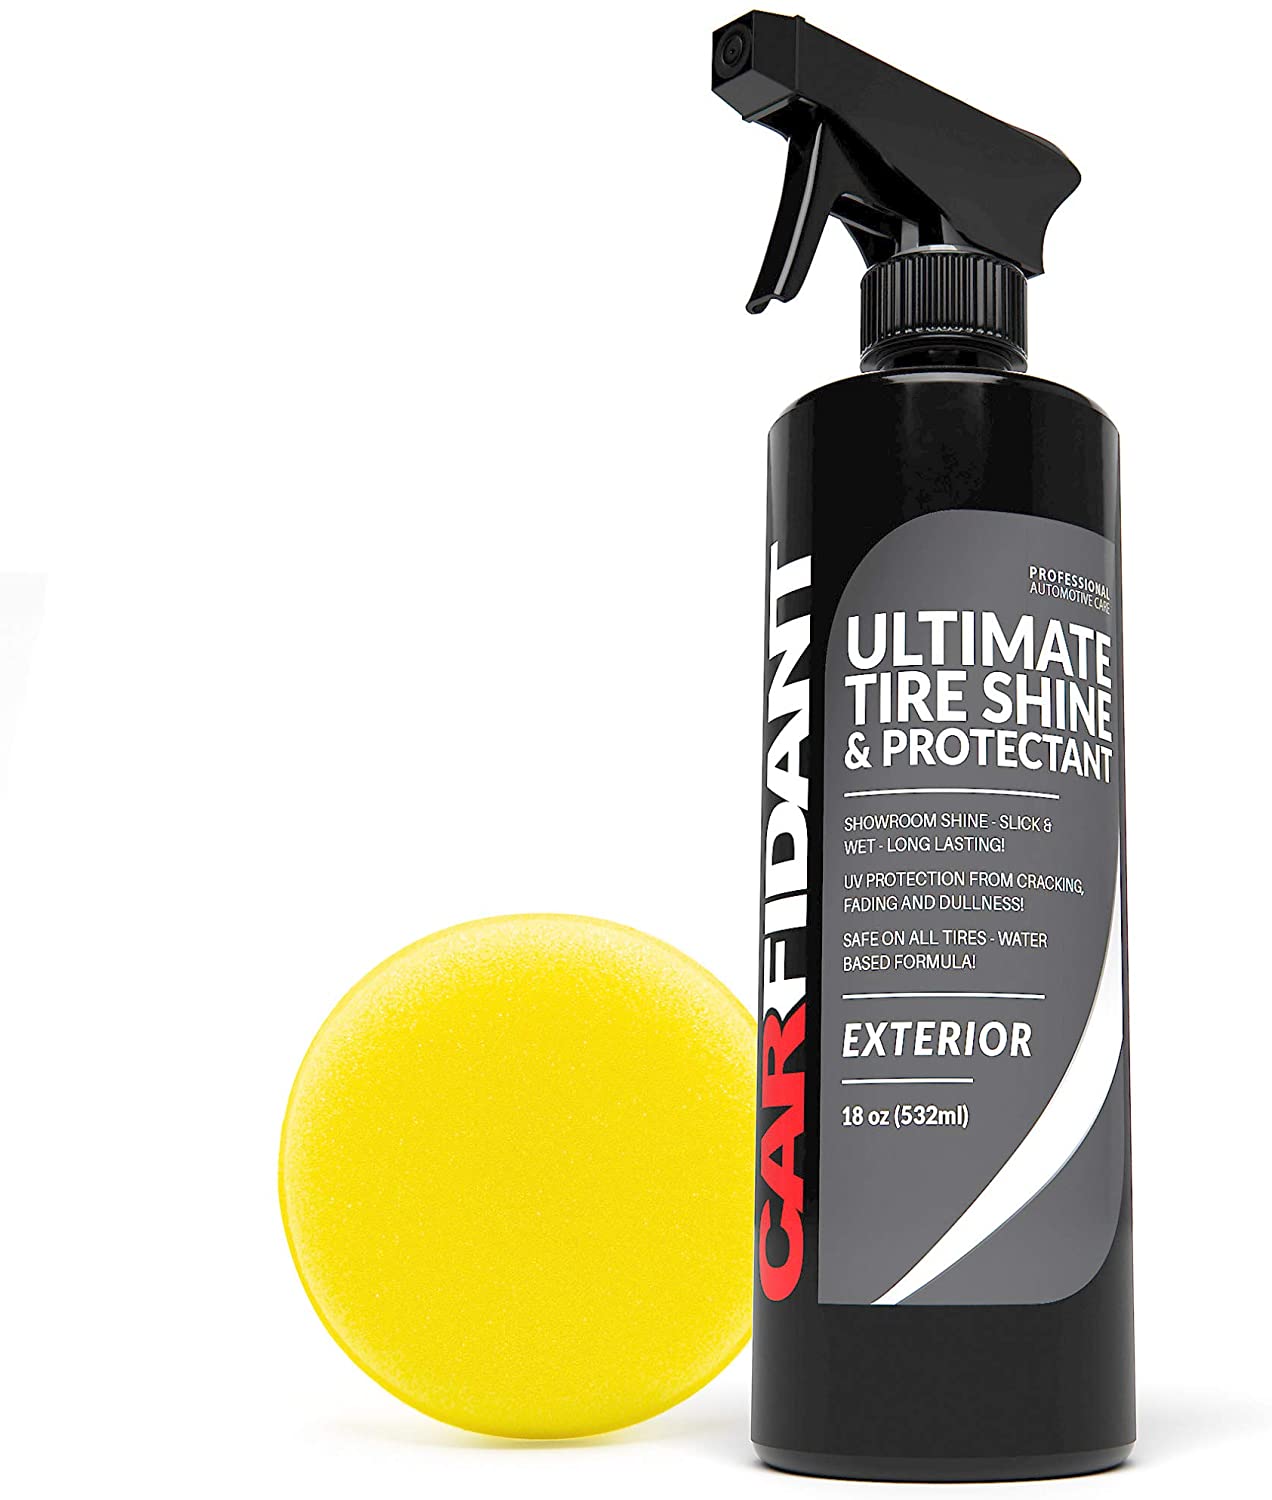 Carfidant Ultimate Tire Shine Spray - Tire Dressing & Protectant Kit